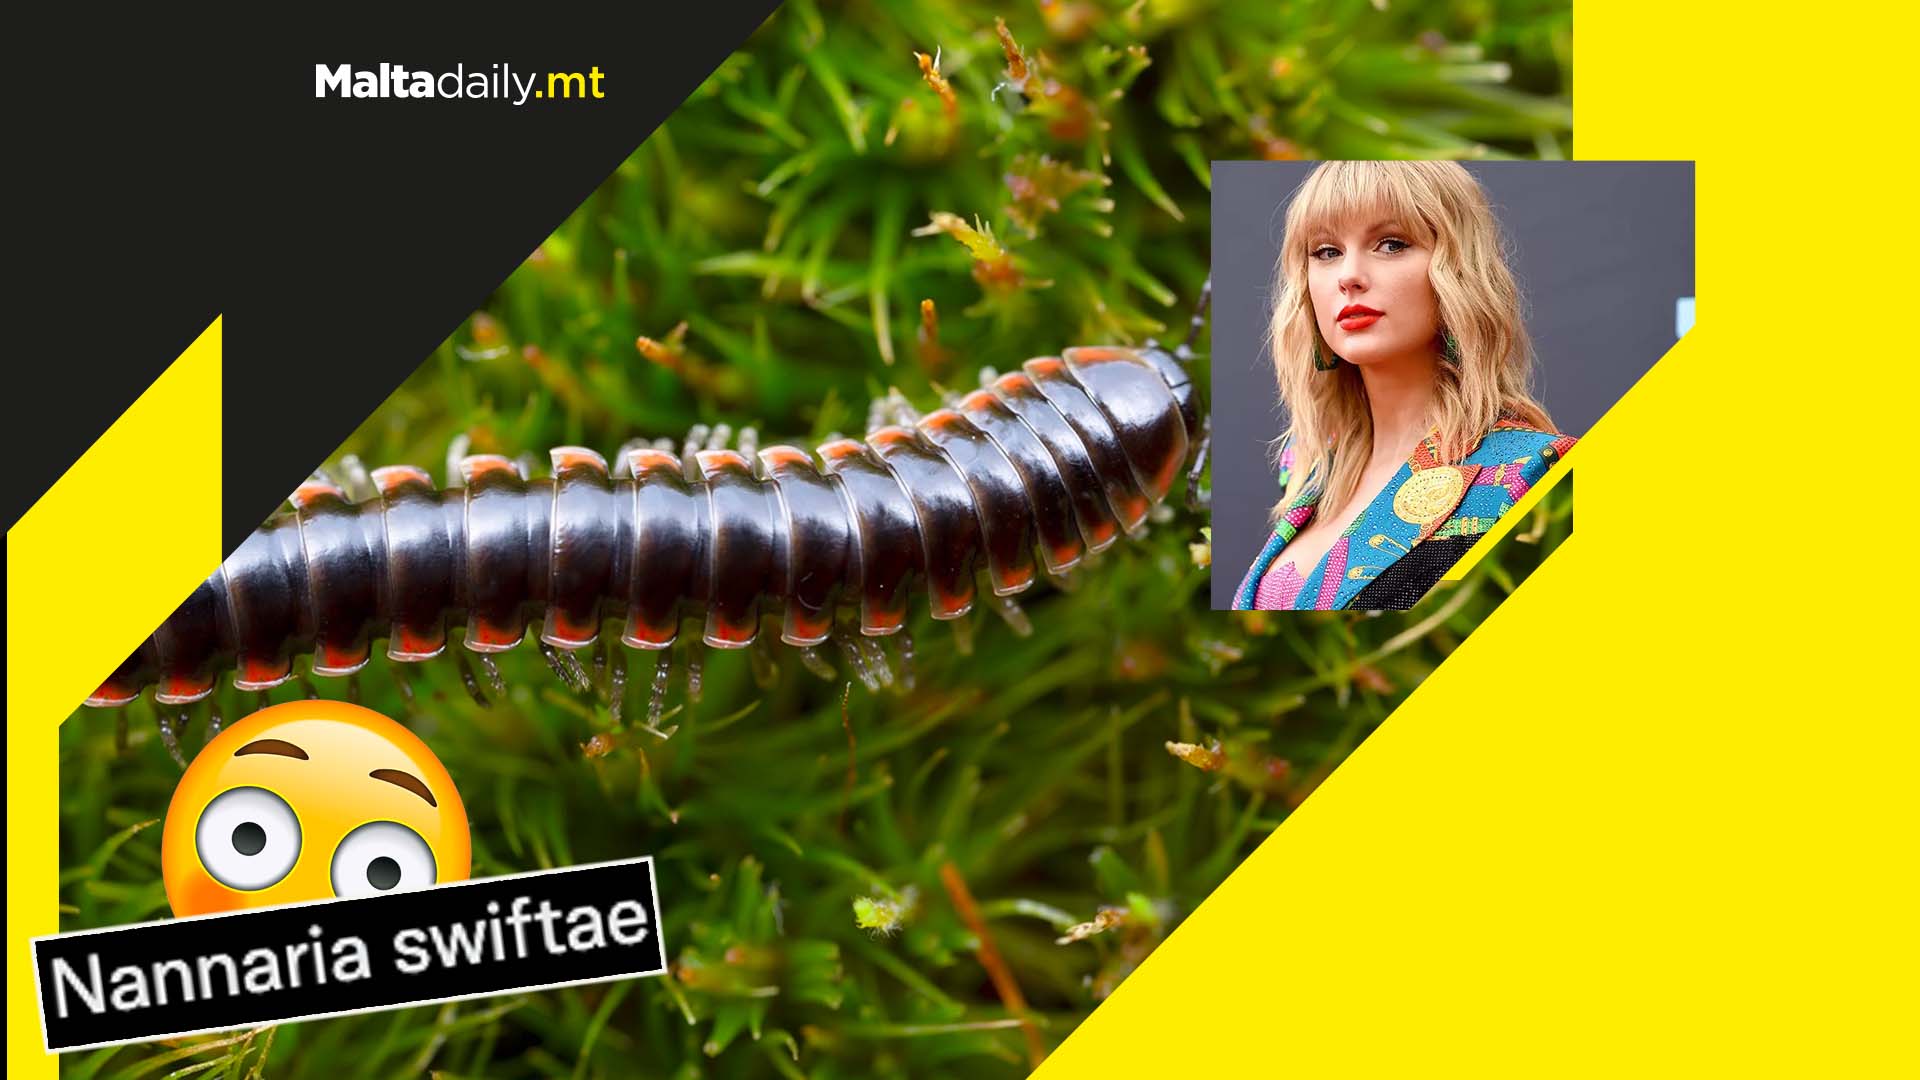 Scientist names new millipede species after Taylor Swift due to being a fan